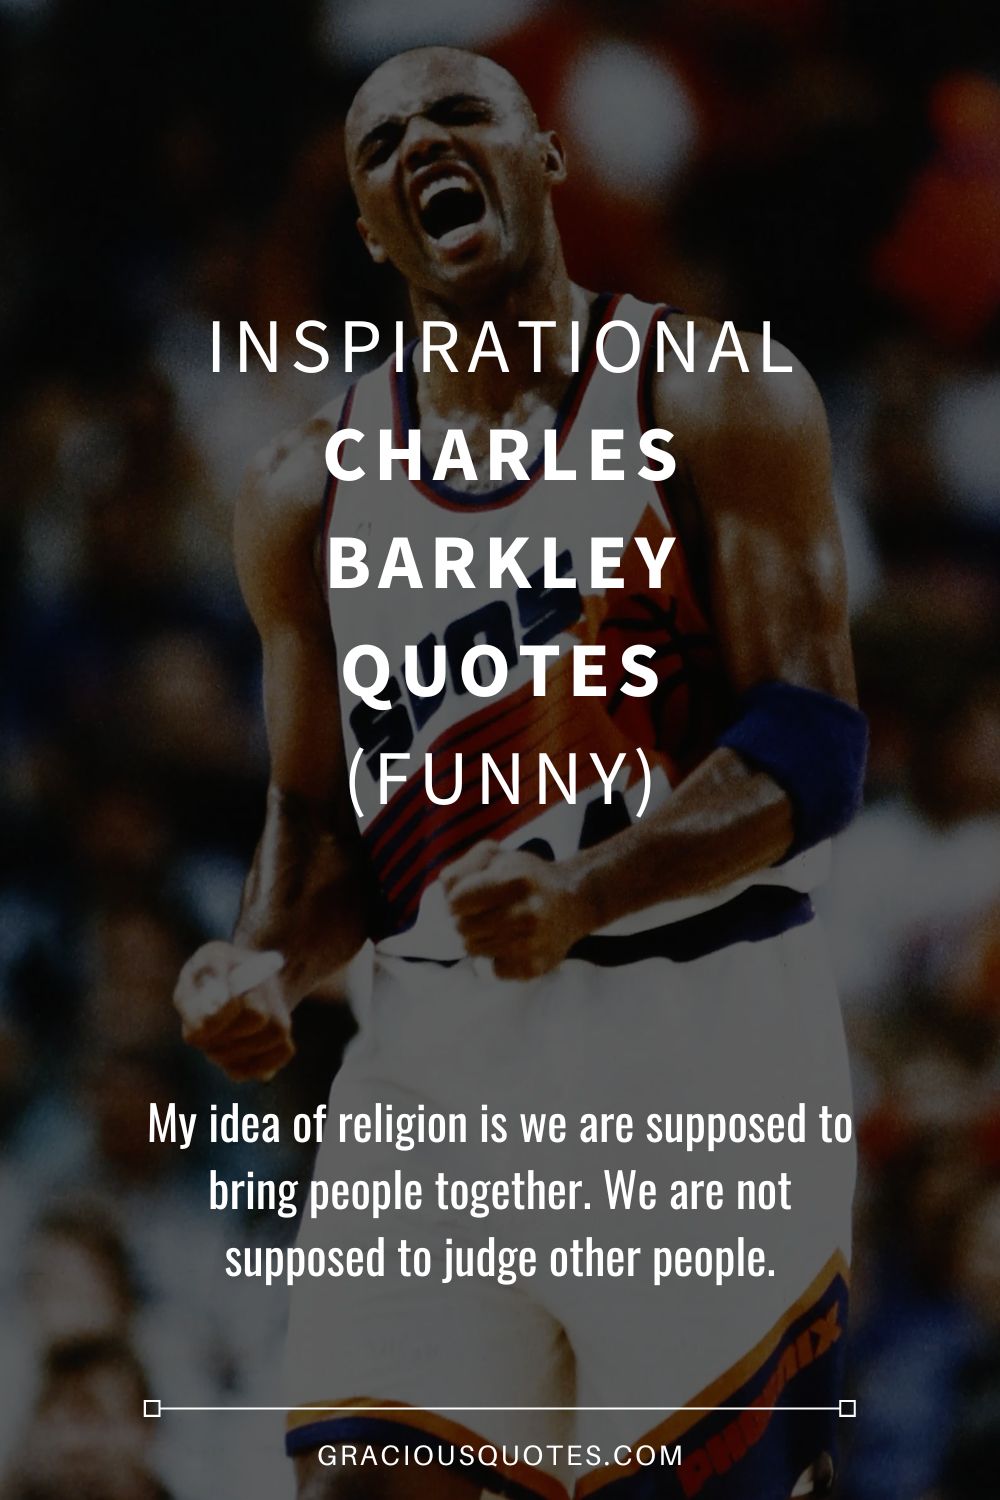 Inspirational Charles Barkley Quotes (FUNNY) - Gracious Quotes